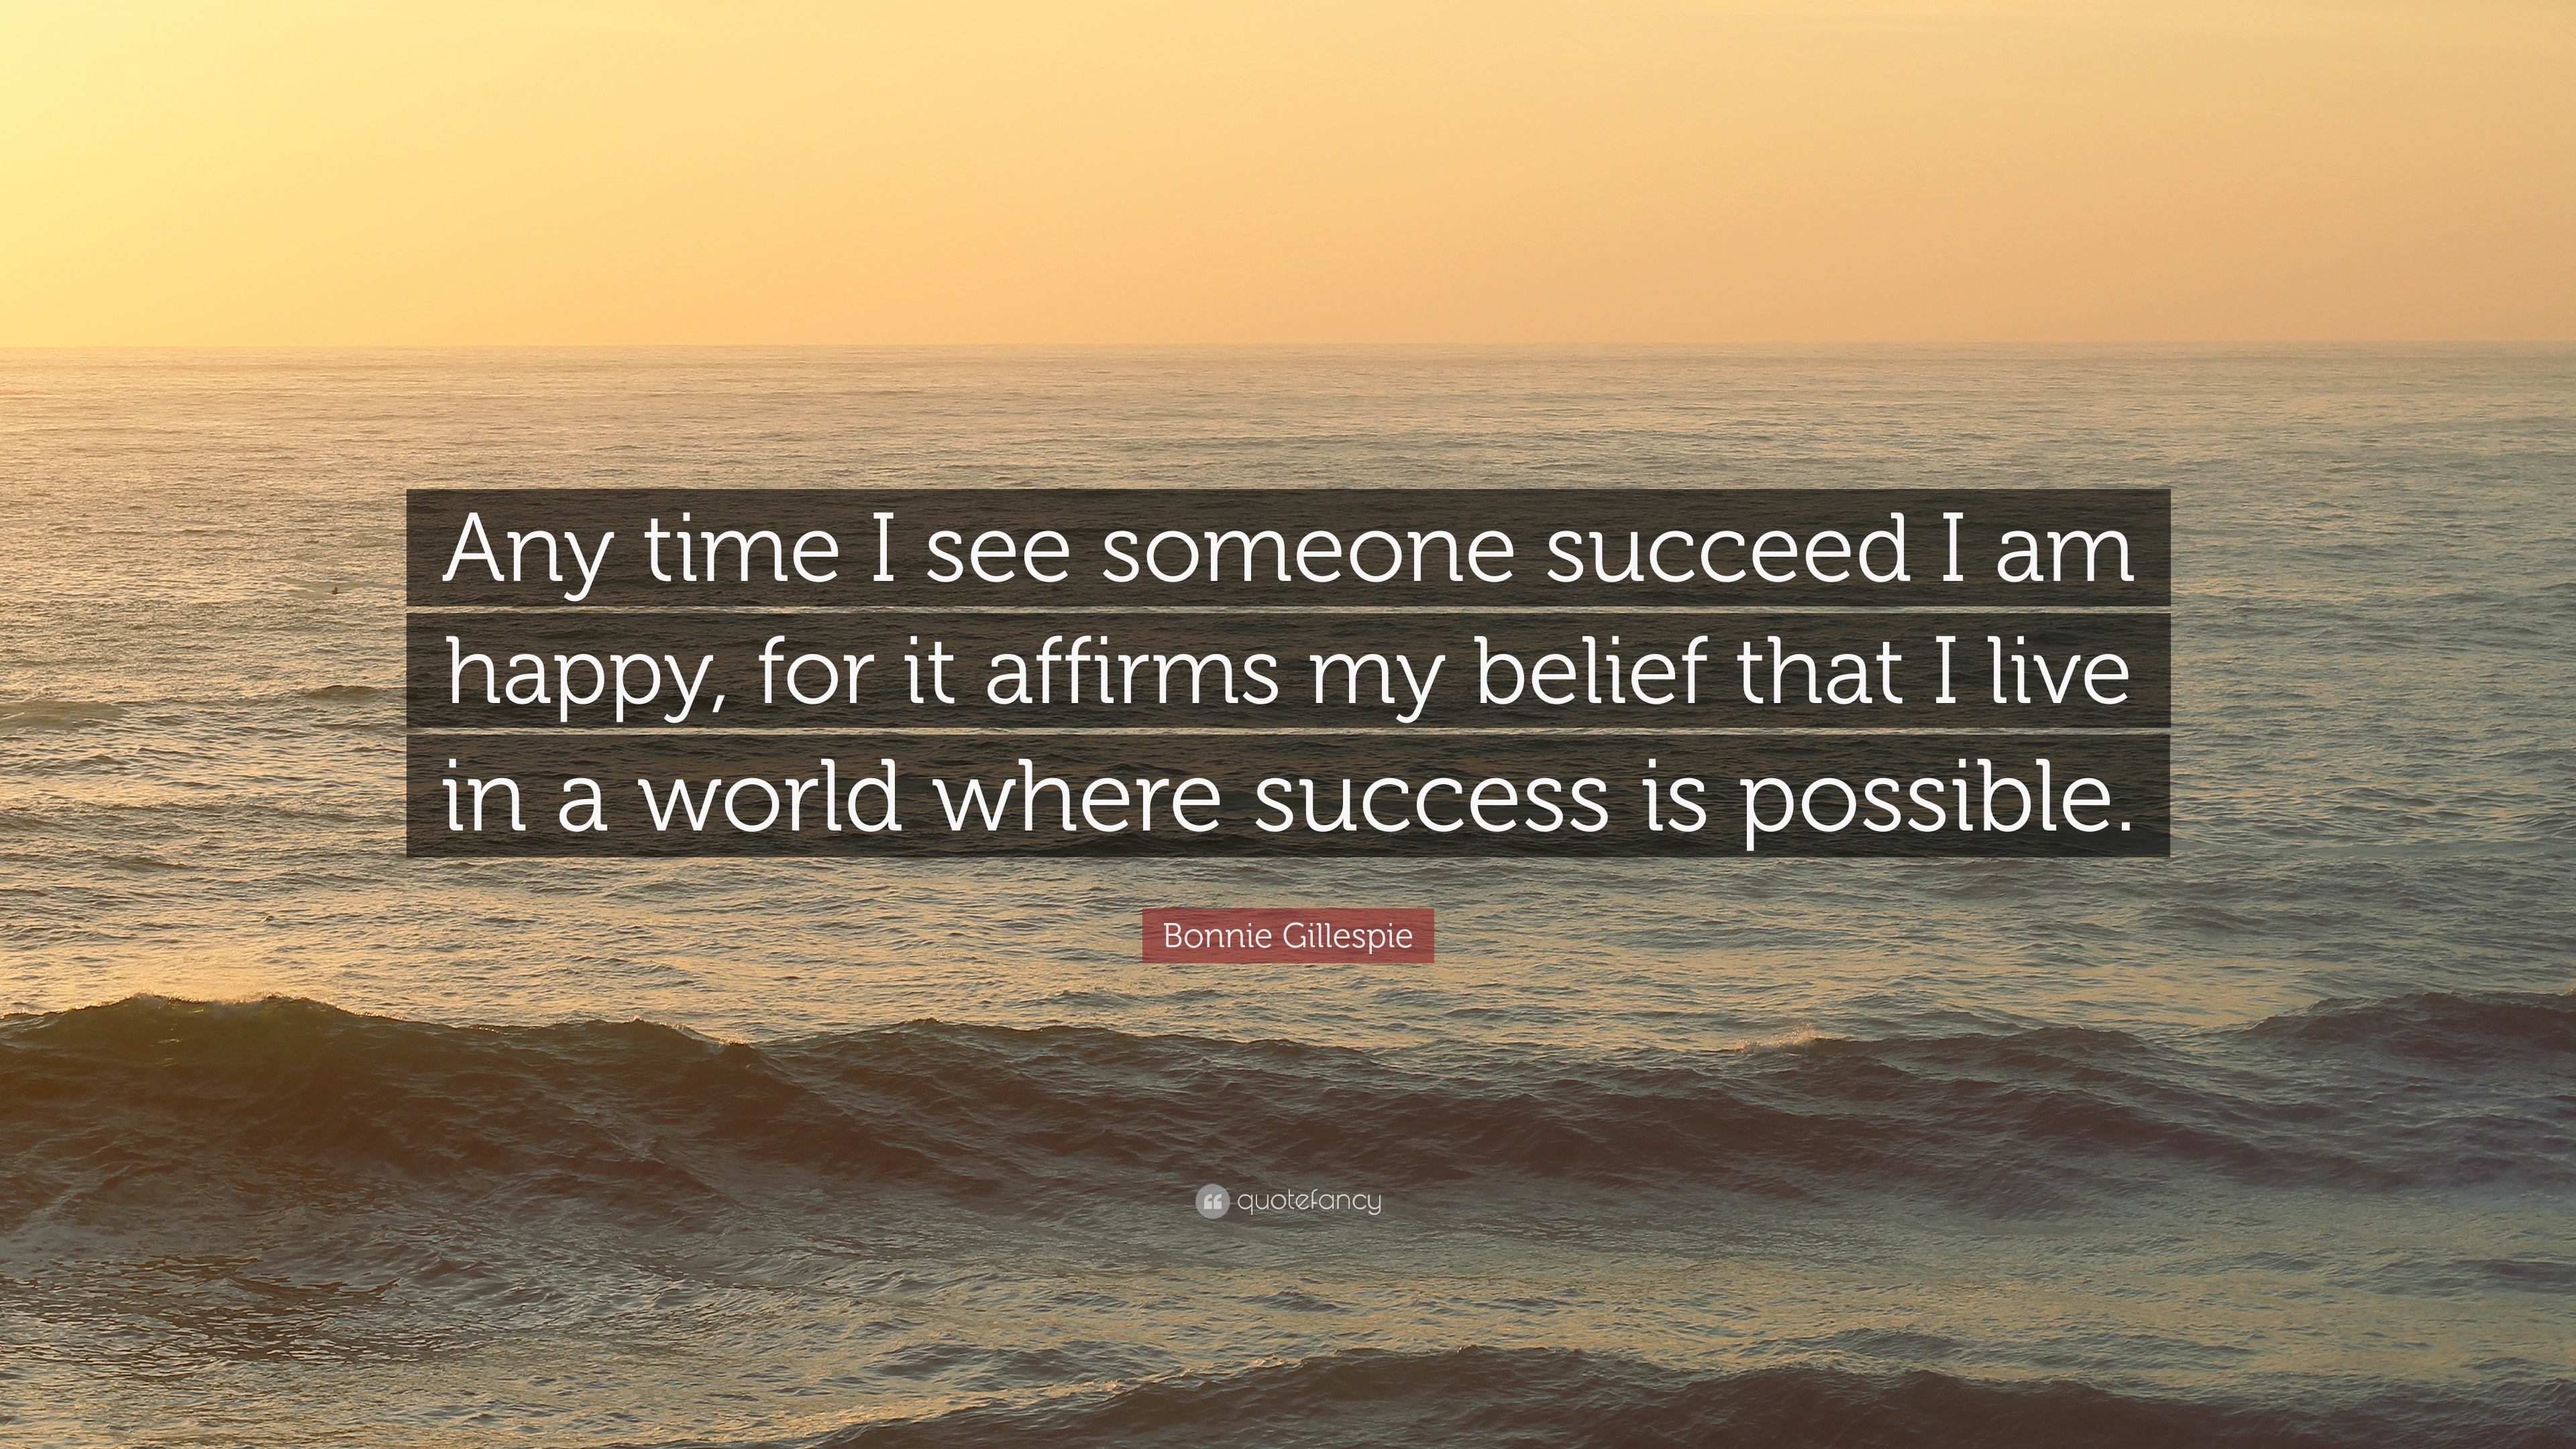 Be Happy For Others Success Quotes - quotes today